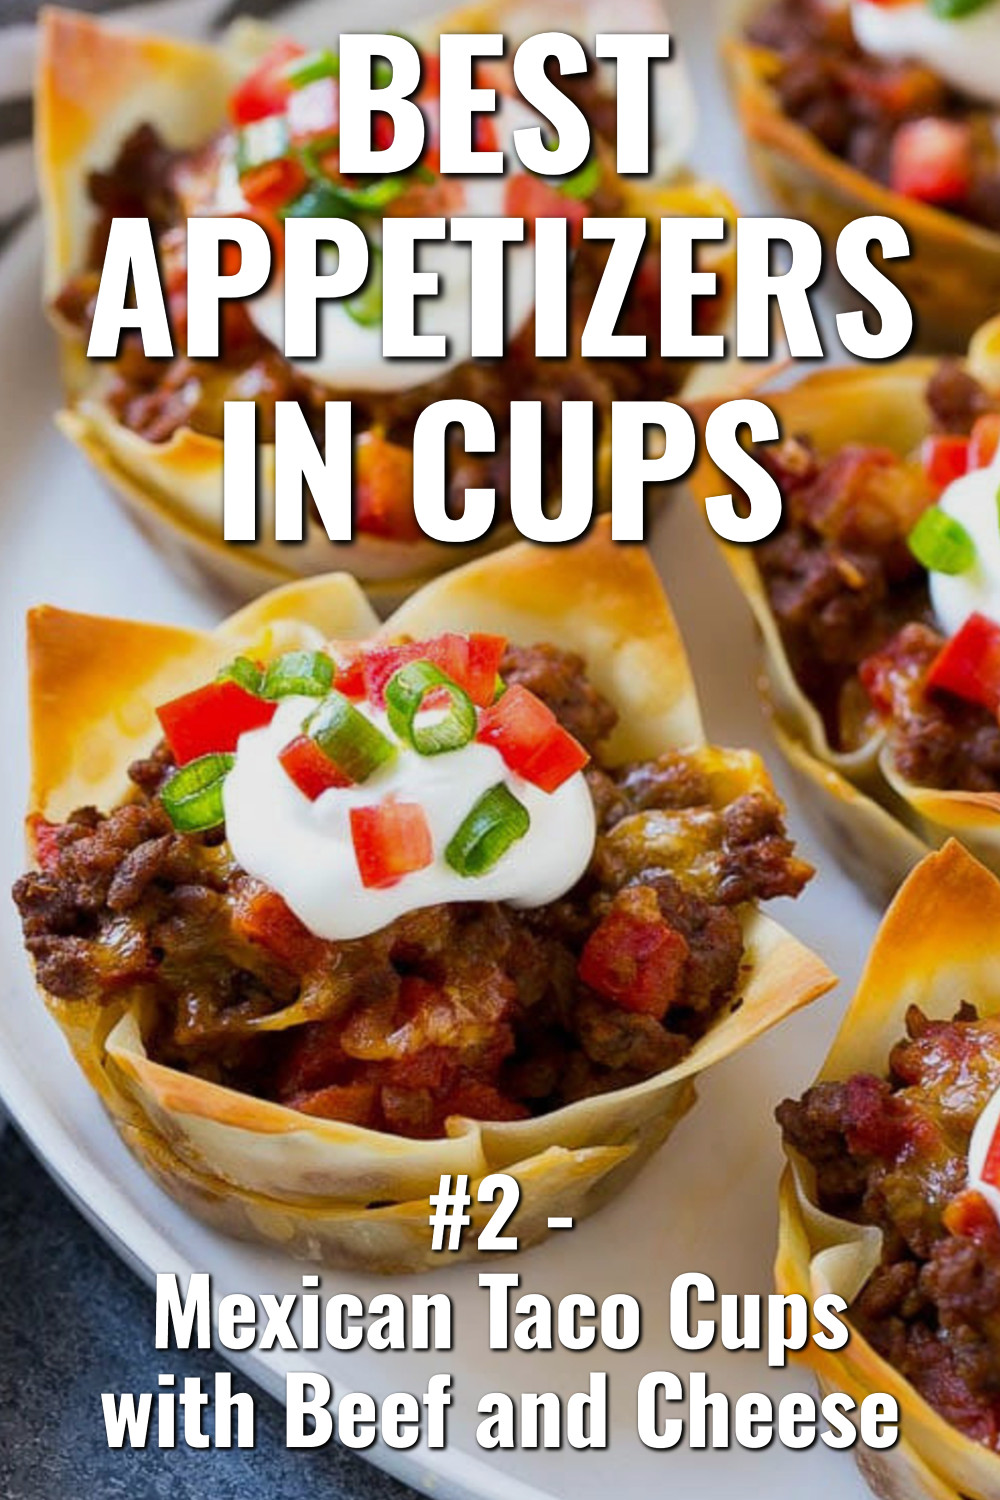 Easy Appetizers In Cups - Mexican Taco Phyllo Cups